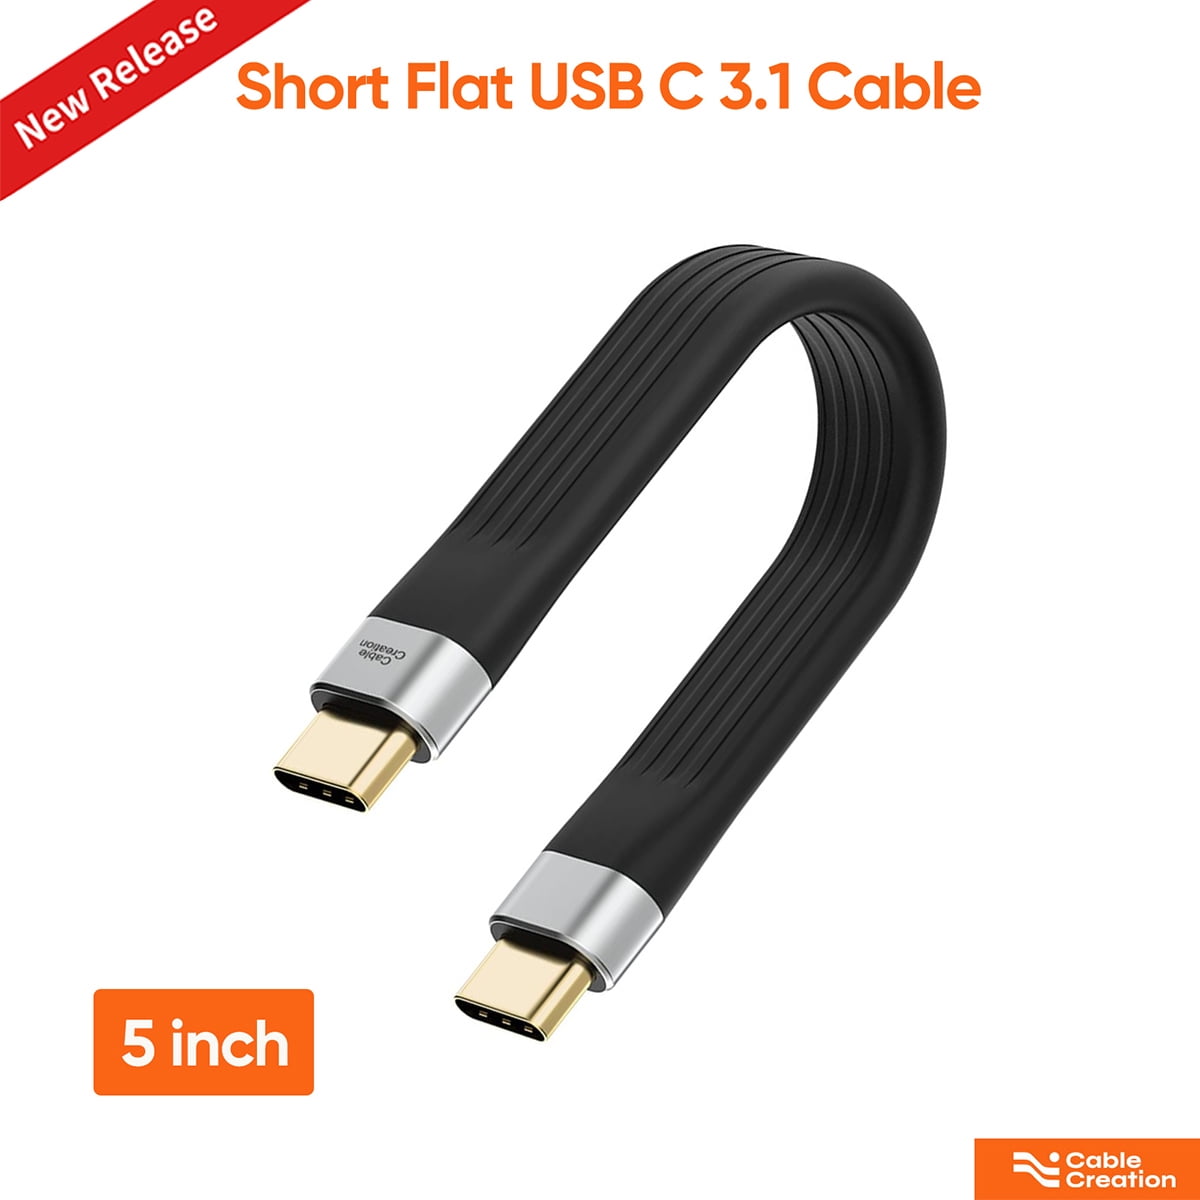 10Gbps Short USB Type C Cable,5inch USB A 3.0 Male to USB C 3.1 Male Cable,USB  C 3.1 3A Fast Charging FPC Flat 